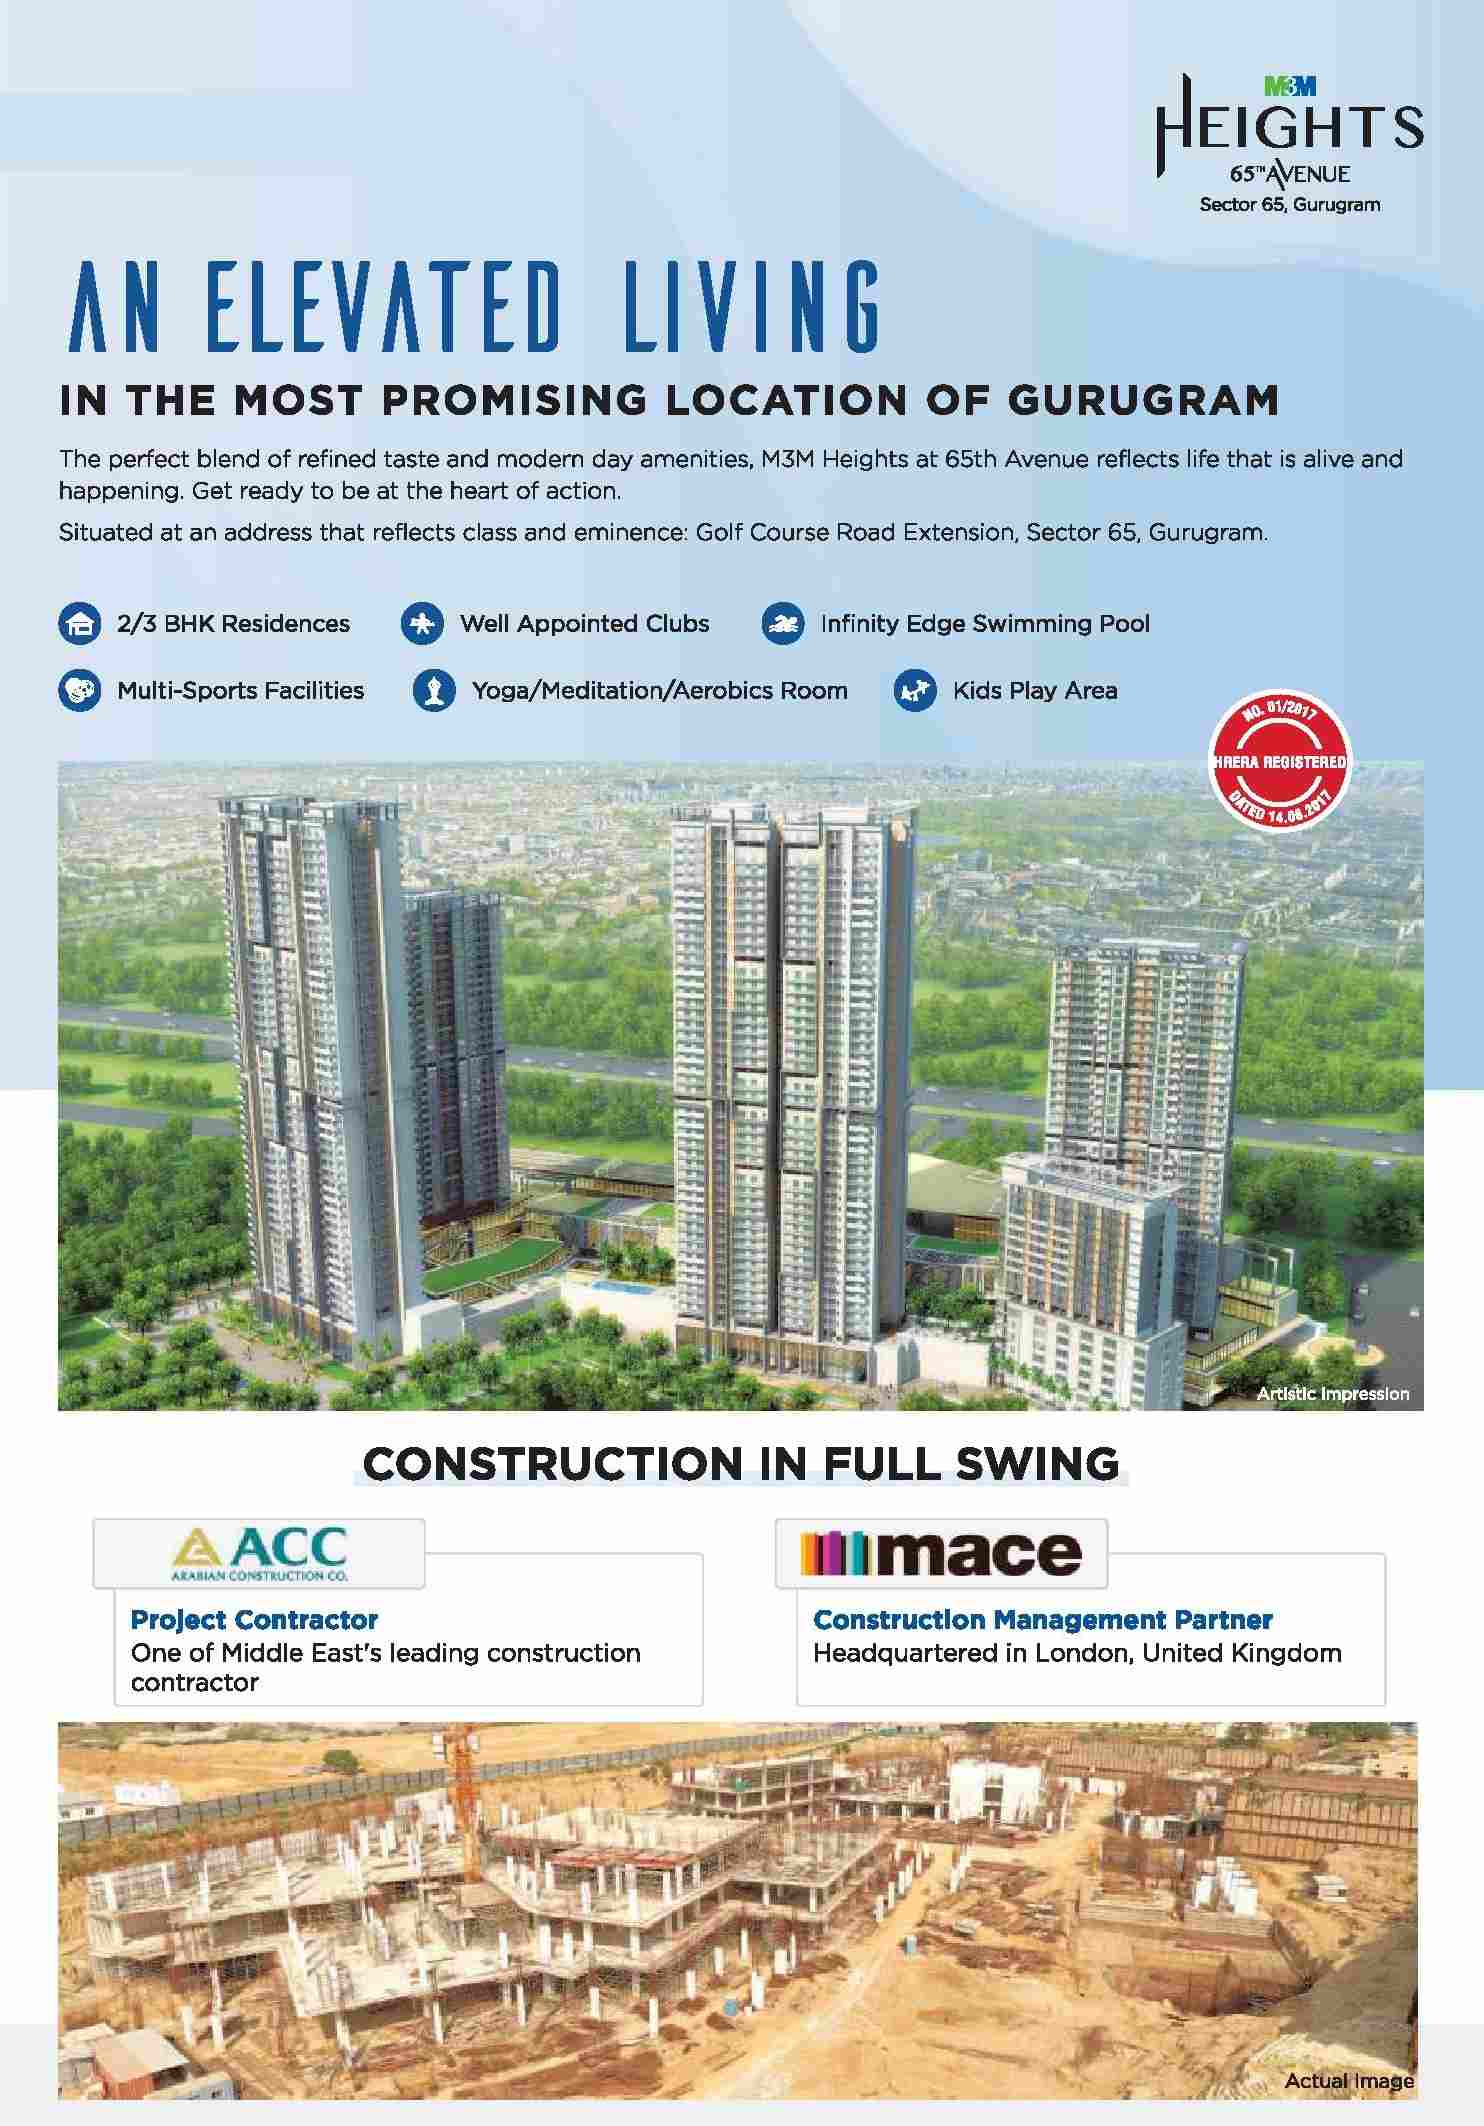 Experience the perfect blend of refined taste & modern day amenities at M3M Heights 65th Avenue, Gurgaon